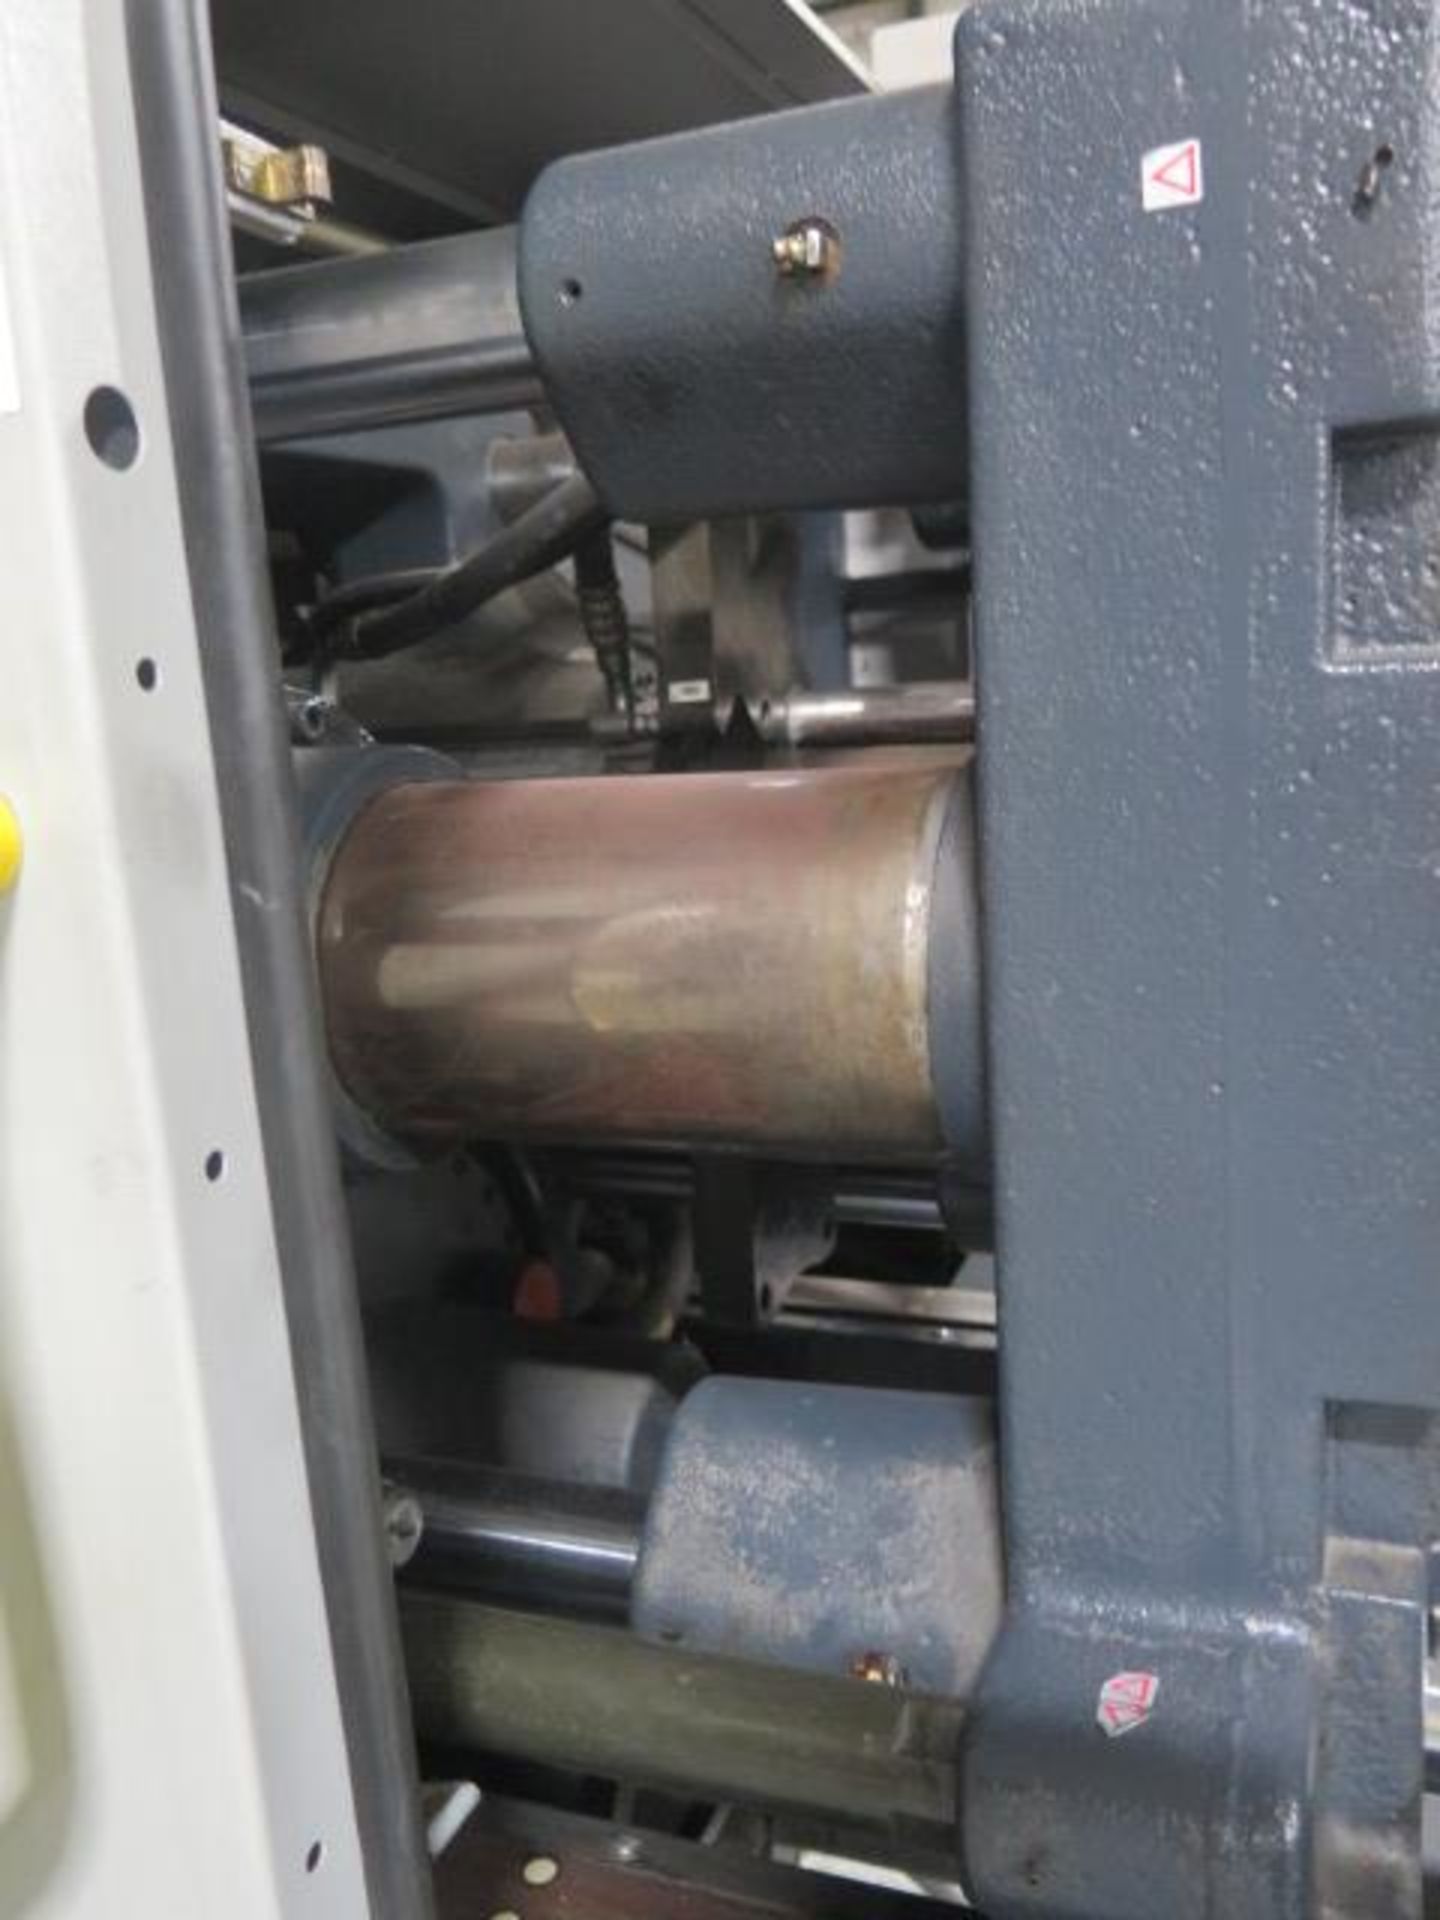 Demag Ergotech 800/420-200 80-Ton Plastic Injection Molding s/n 7153-0016 w/ Demag NC4, SOLD AS IS - Image 7 of 20